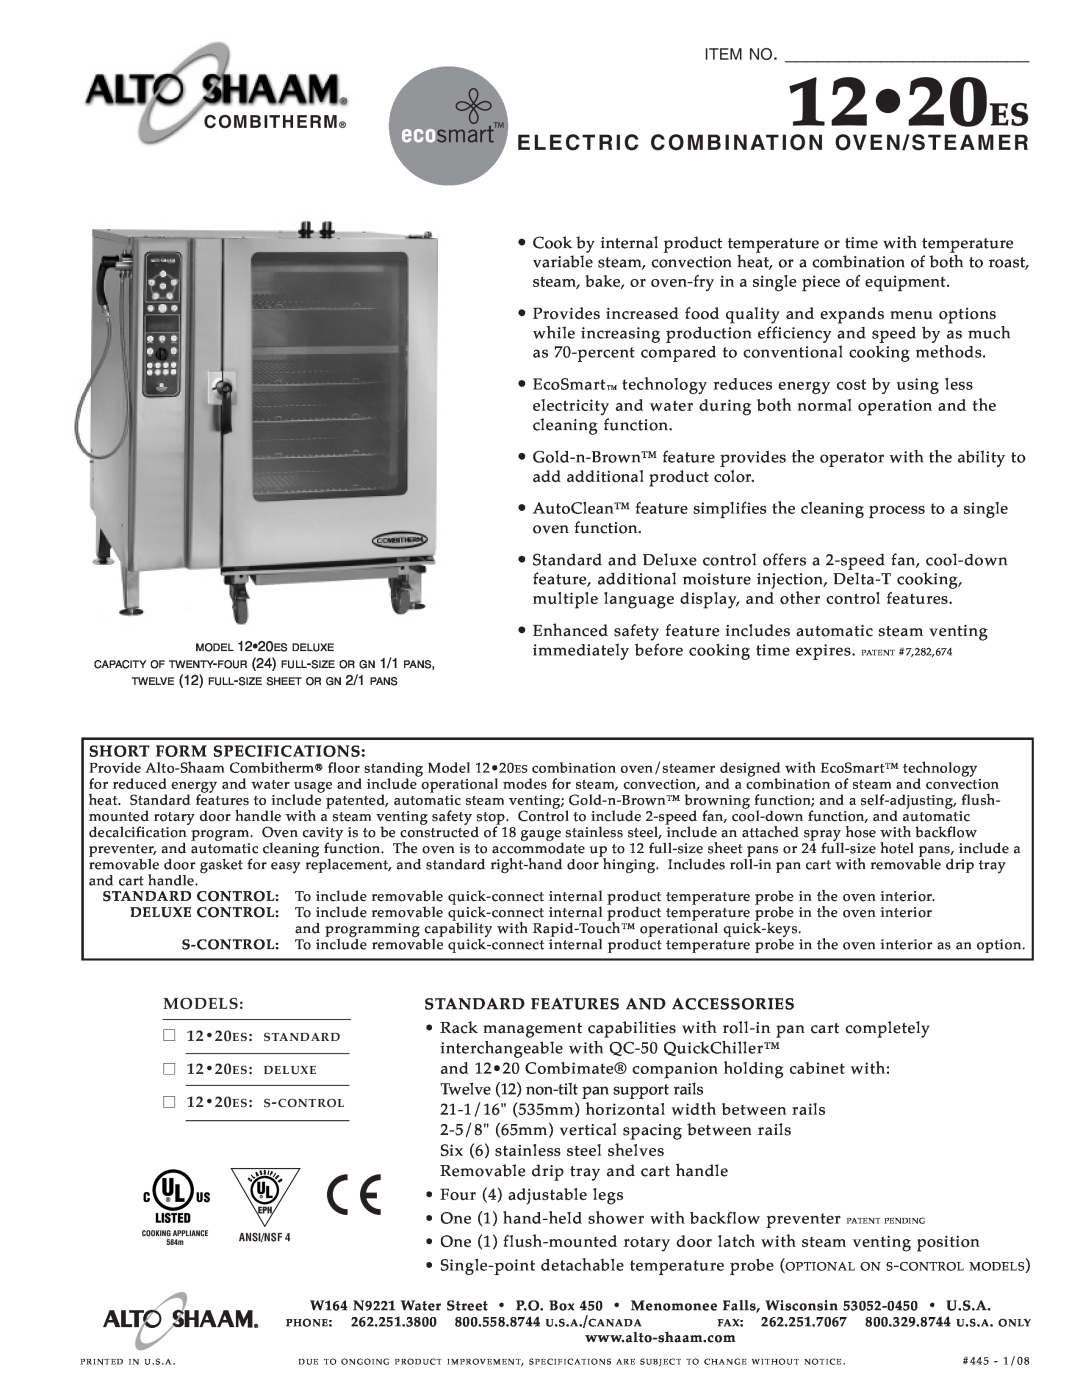 Alto-Shaam 12.20ES specifications 12 20ES, Elect Ric Combina Tion, Oven/S Teame R, Item No, Combitherm 